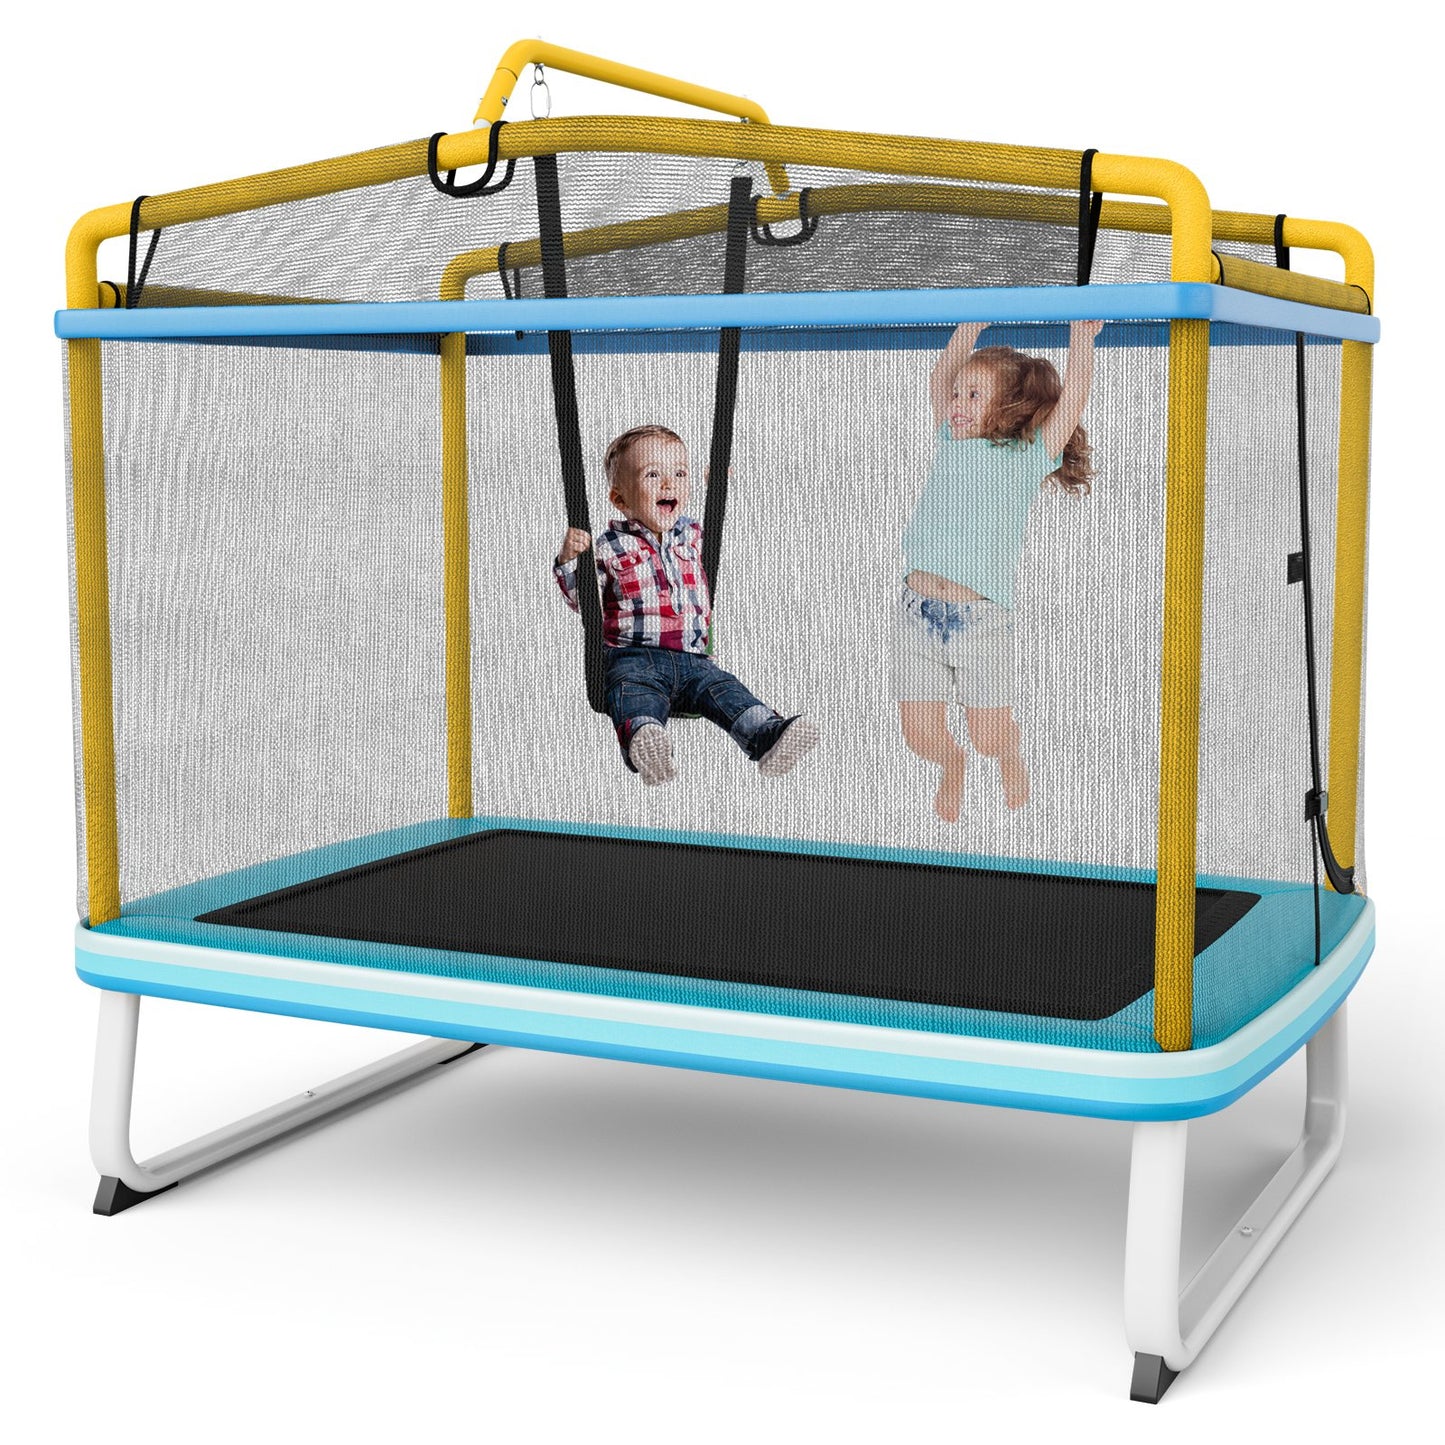 6 Feet Rectangle Trampoline with Swing Horizontal Bar and Safety Net, Yellow